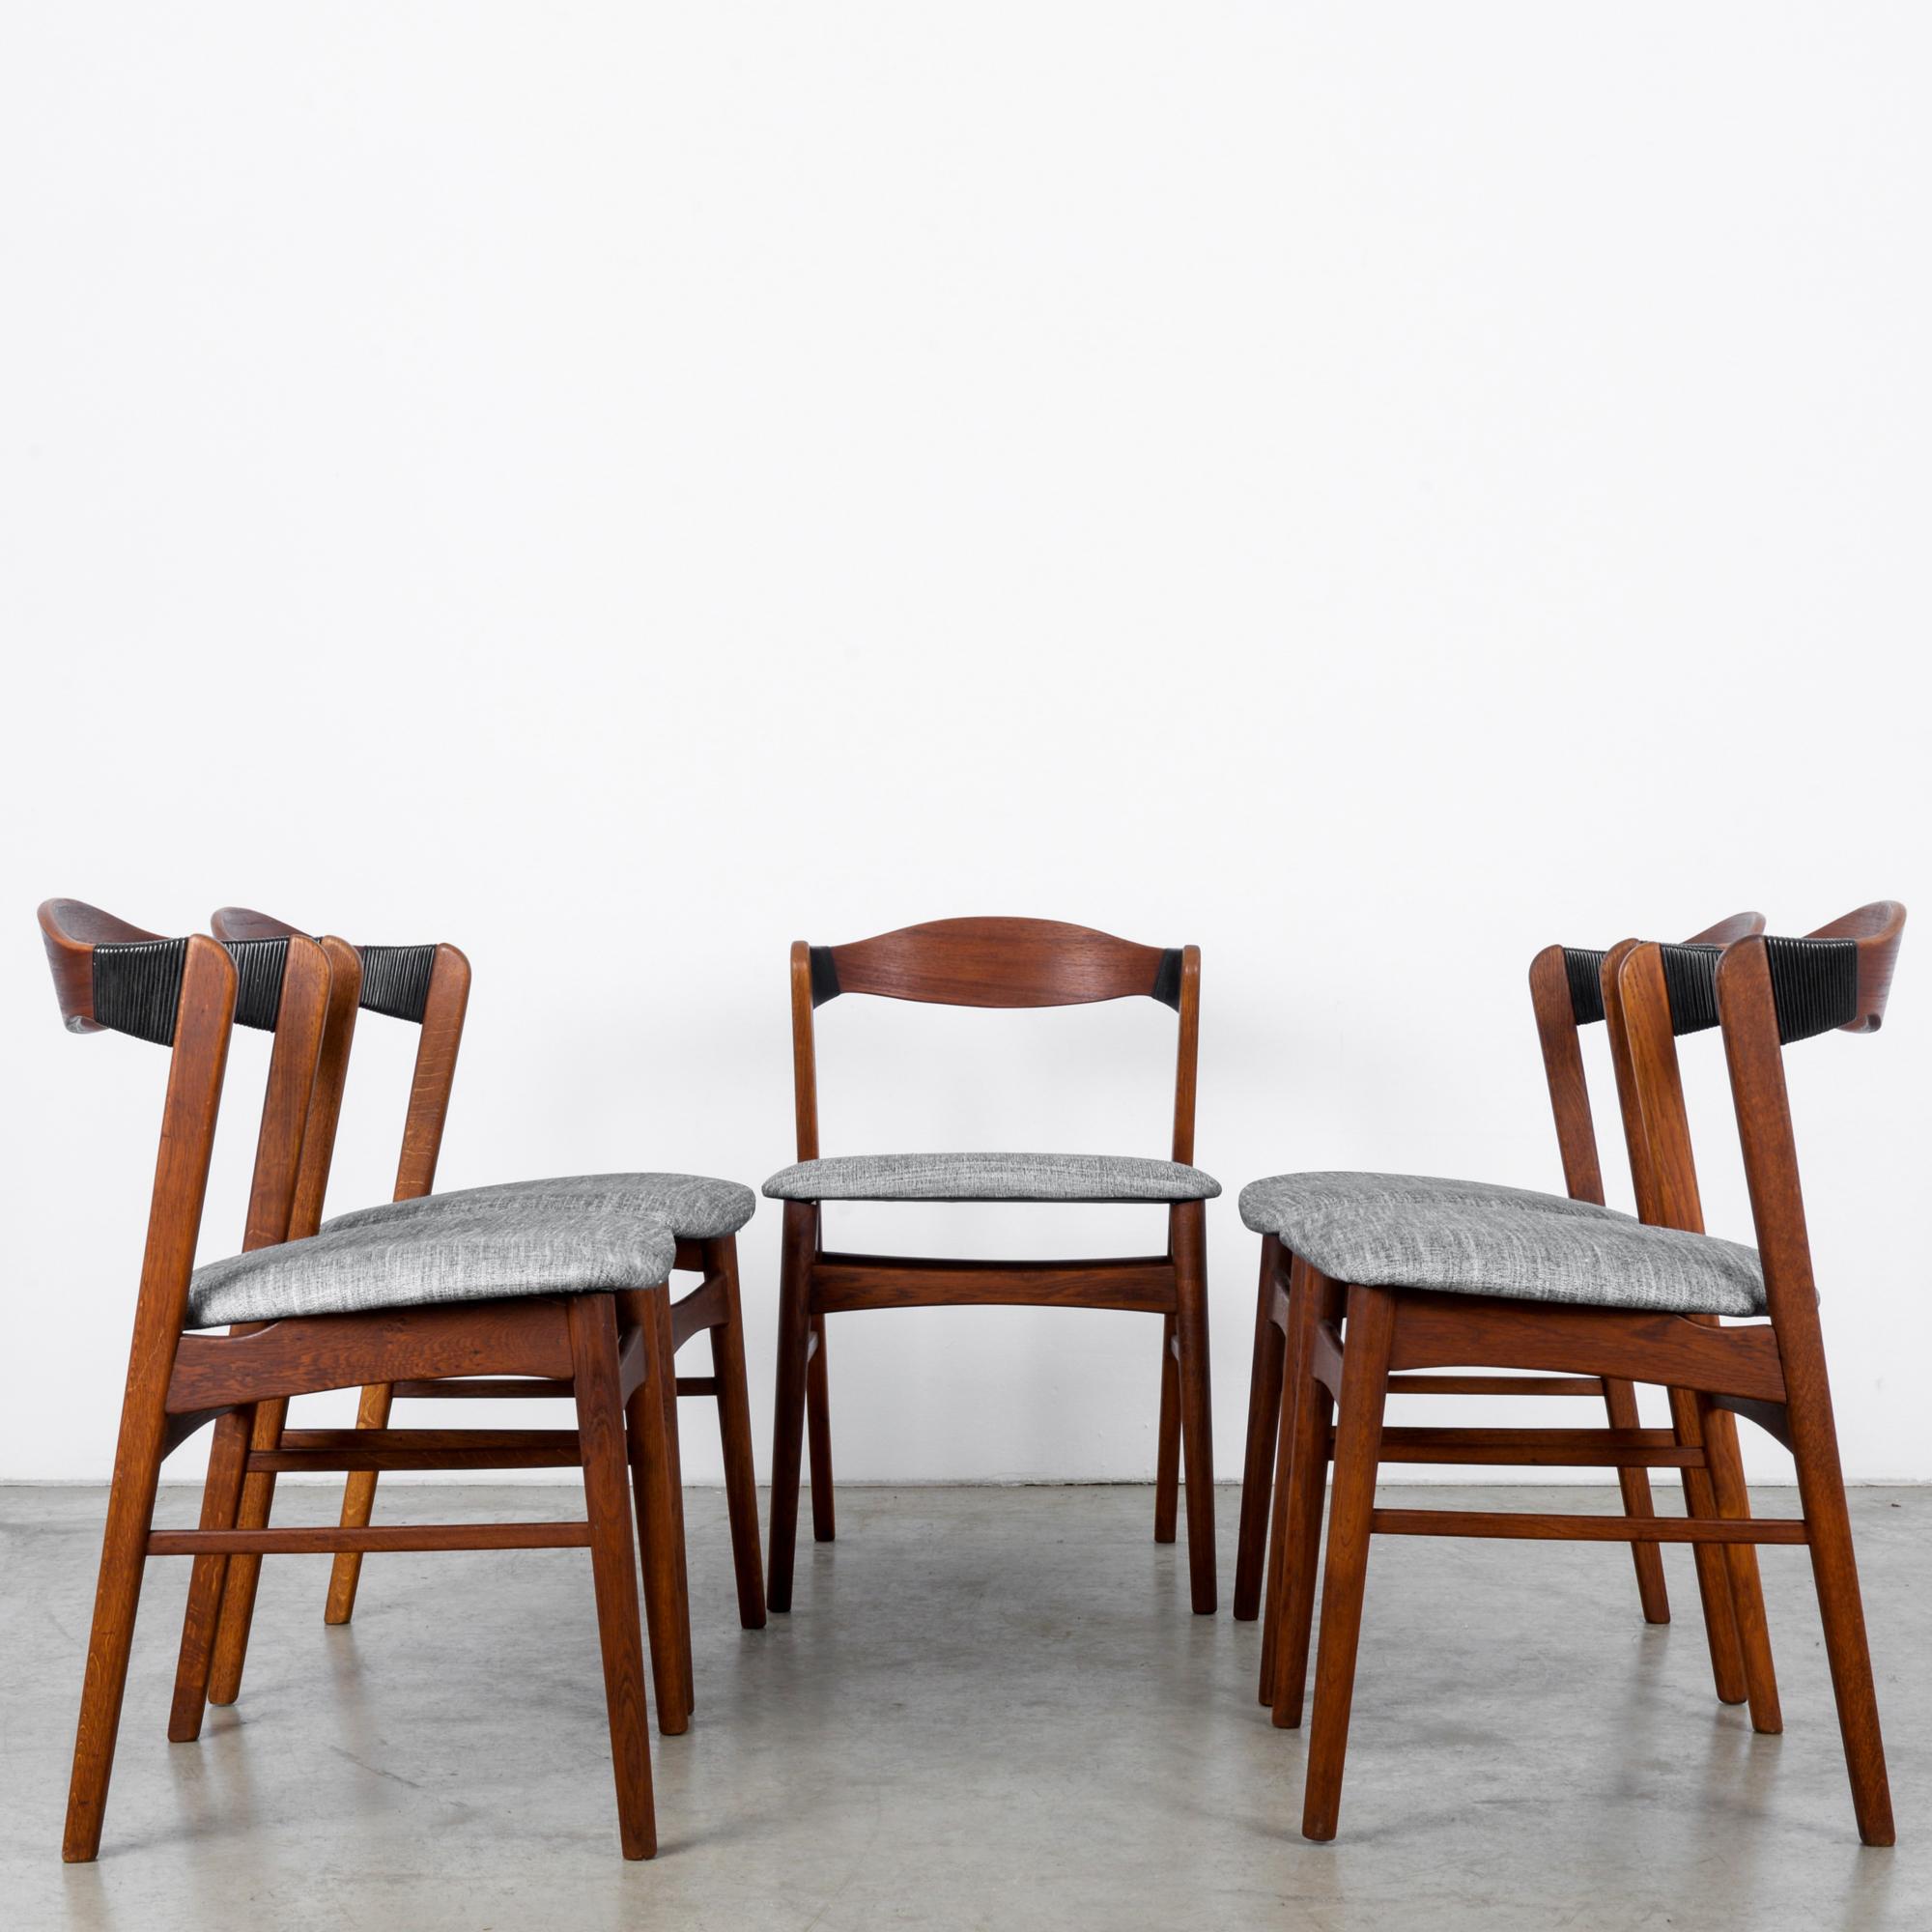 1960s Danish Teak Chairs with Upholstered Seats, Set of Five 9